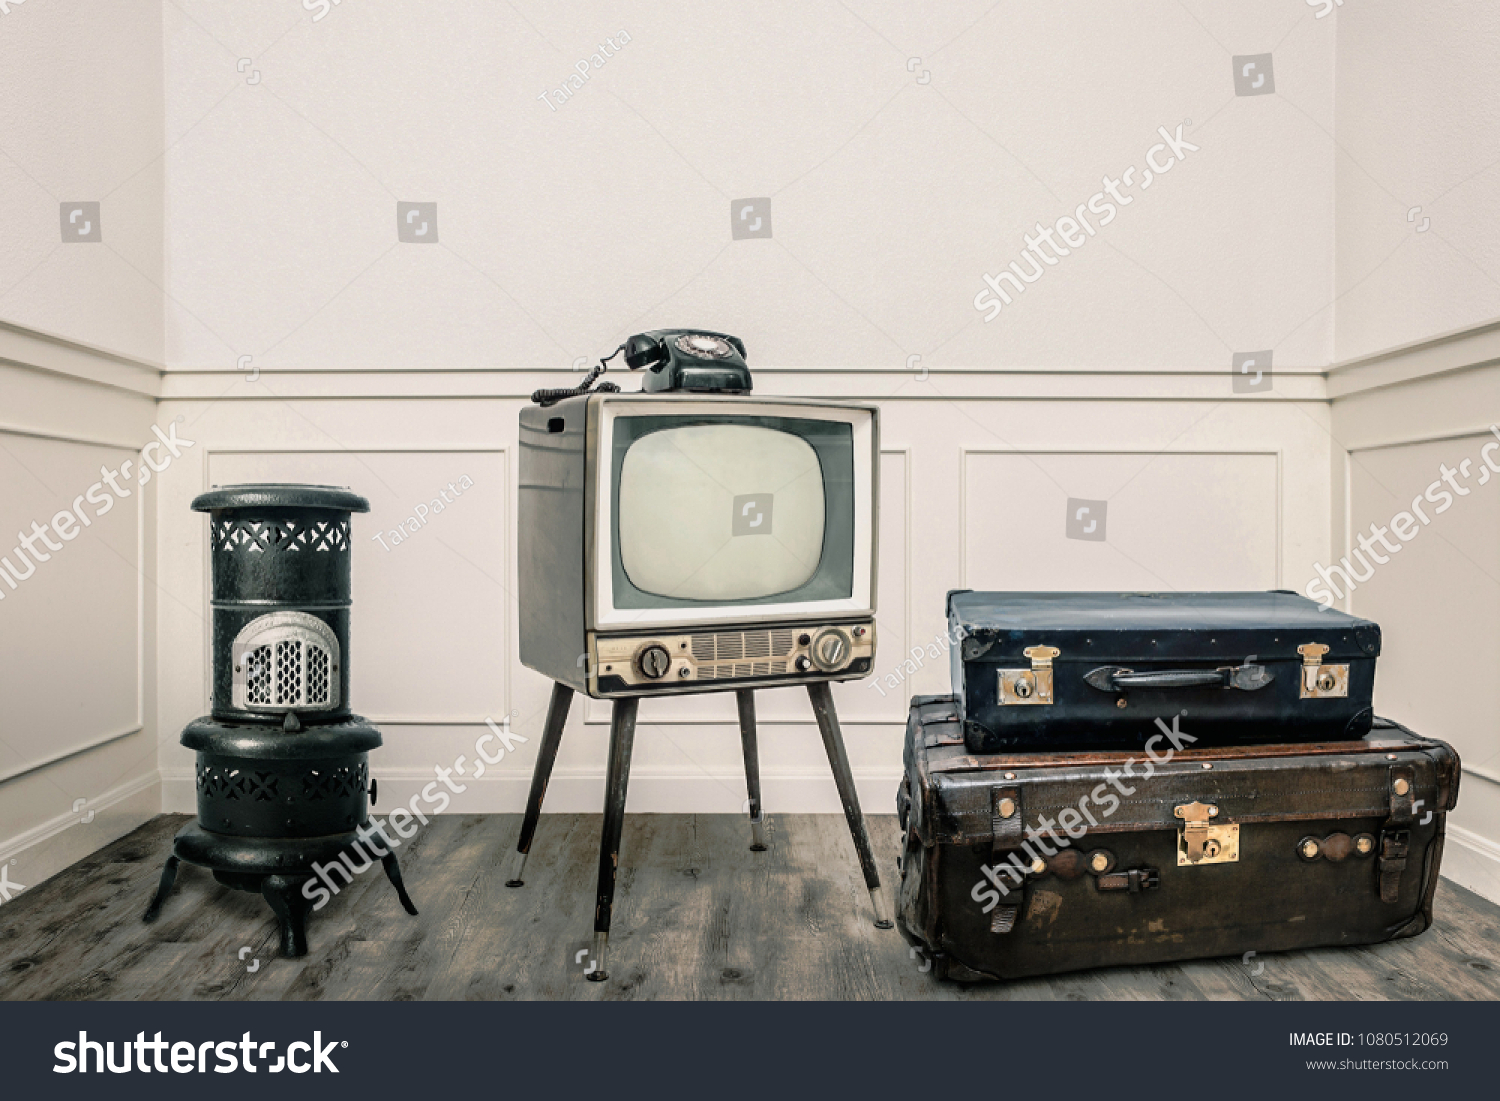 Vintage heater, television, and suitcases on floor in cozy room #1080512069